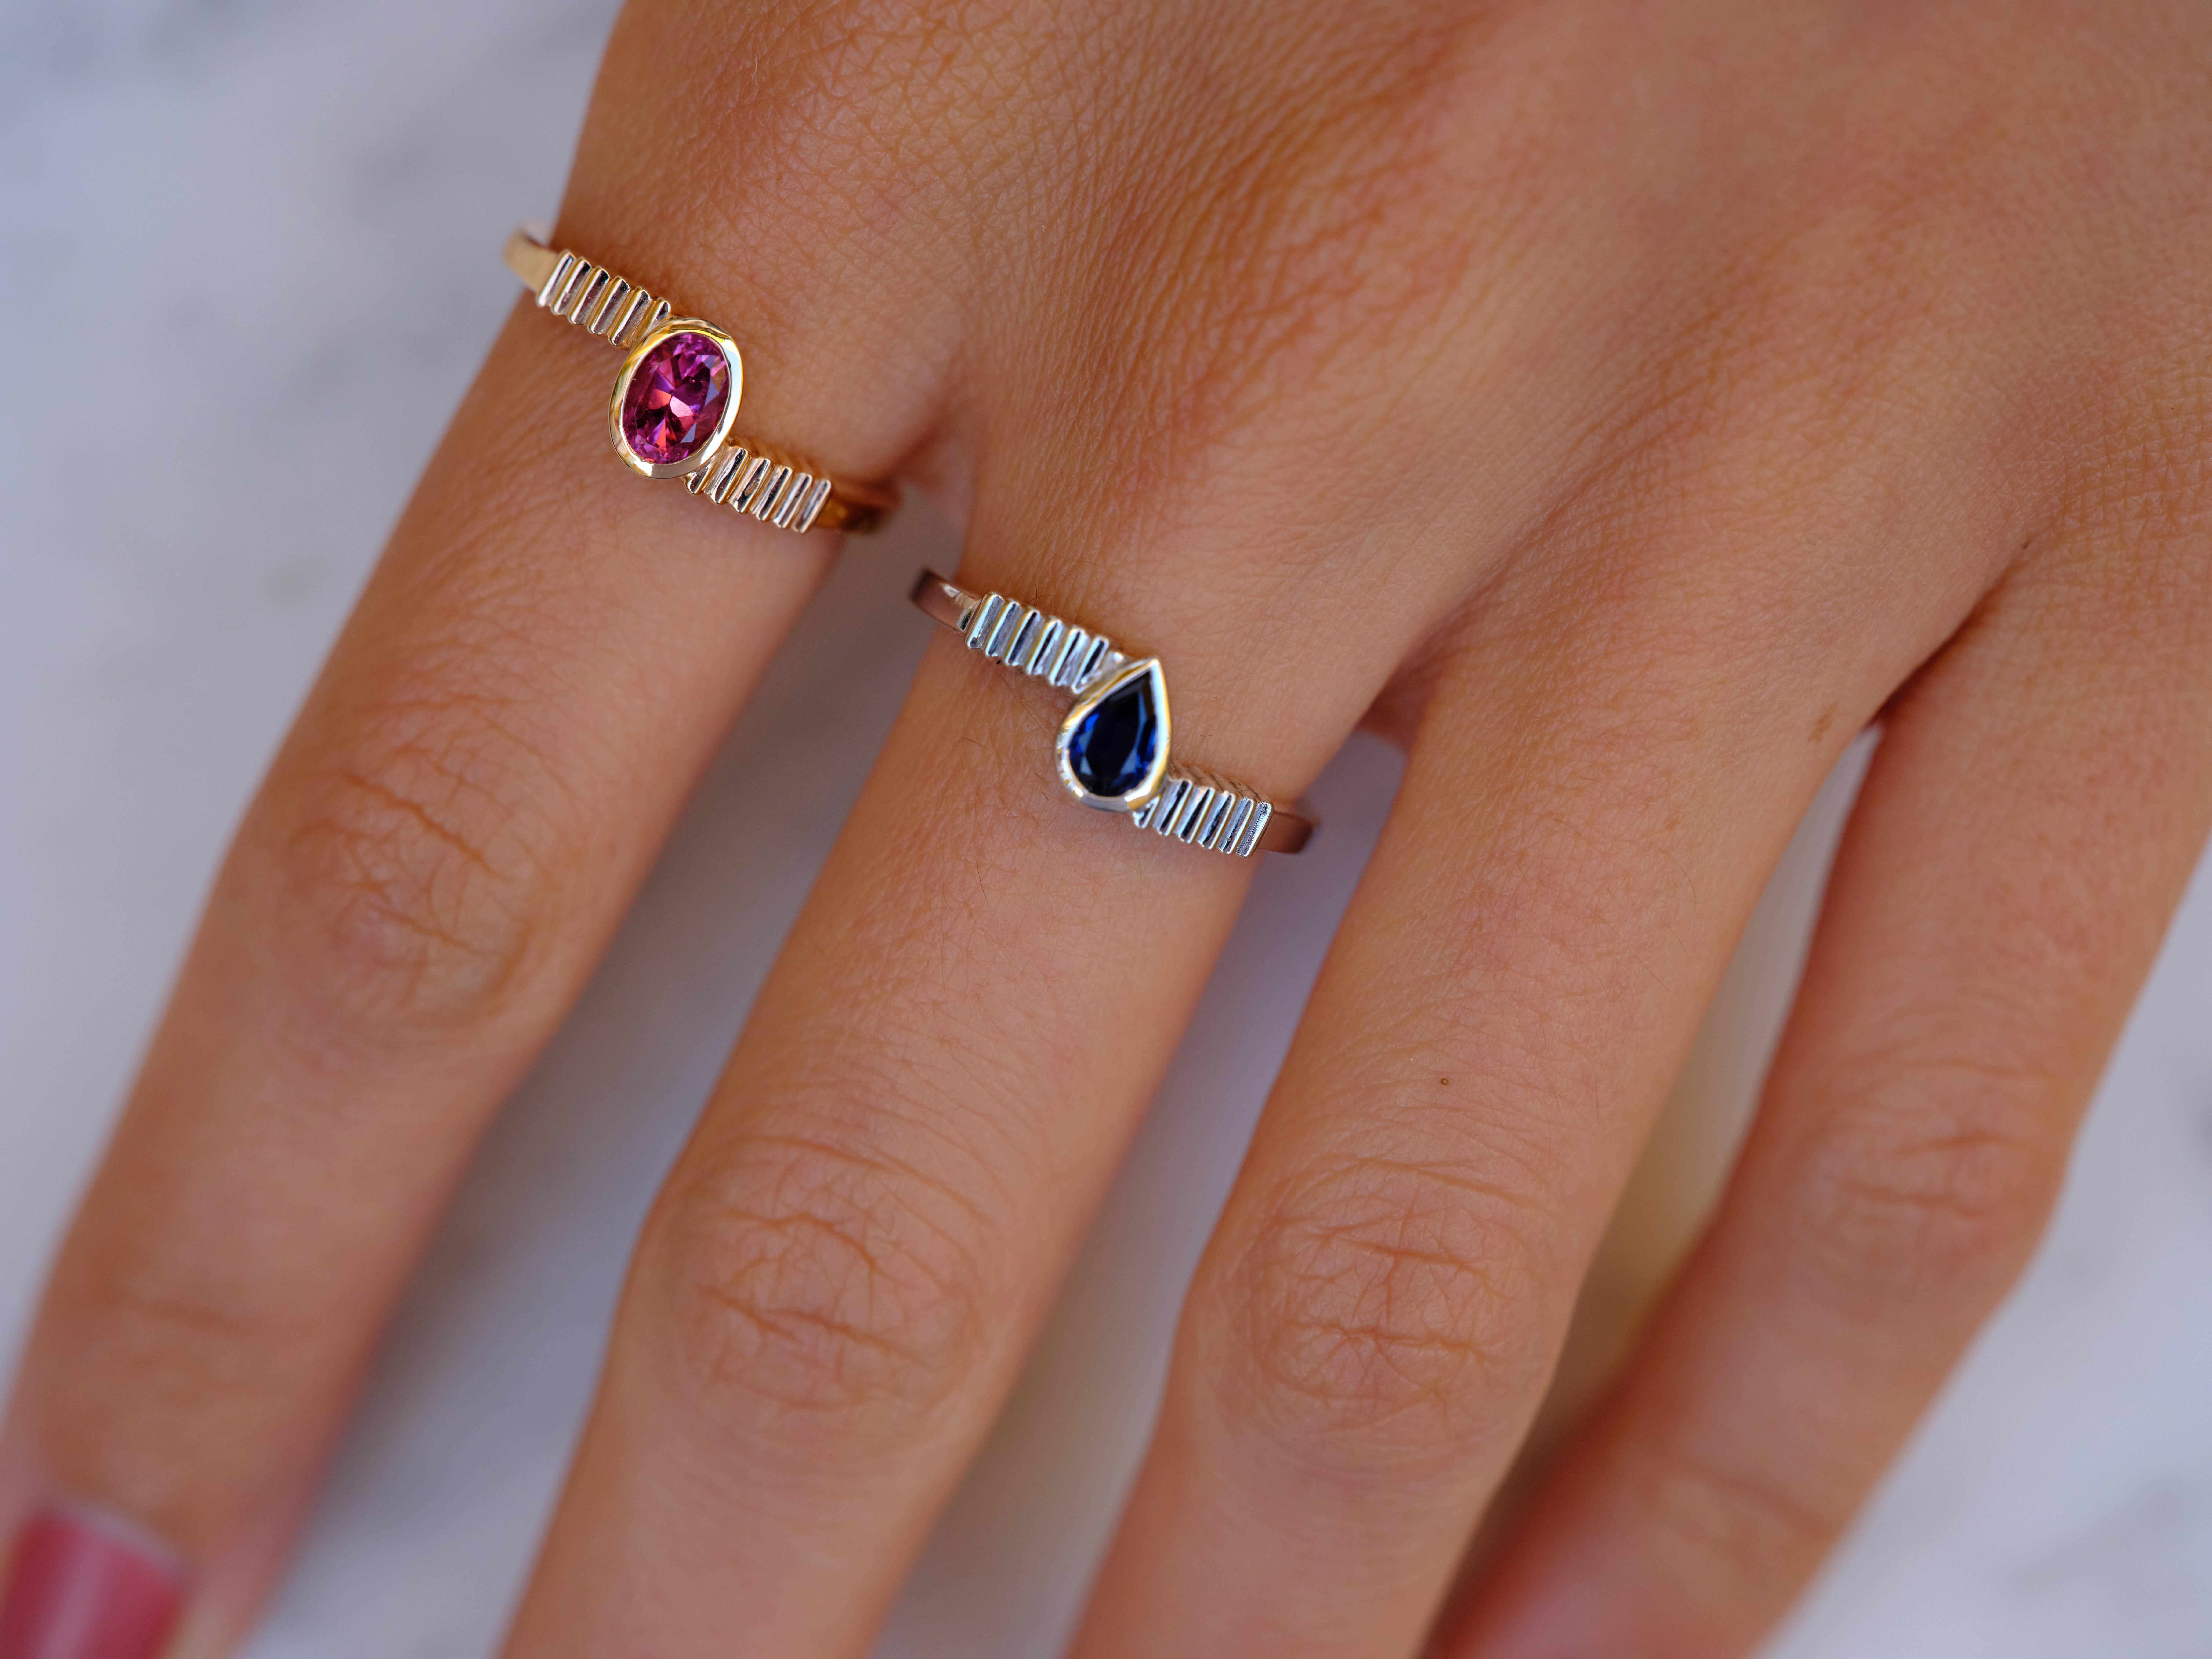 When simplicity meets the extraordinary. Mix & Match

Available White gold blue pear sapphire in size 53 (EU) 6,6 (US), 16,8 mm
Available Rose gold pink oval sapphire in size 53 (EU) 6,6 (US), 16,8 mm

•	18 Karat Recycled Rose Gold 
•	Pink & Blue